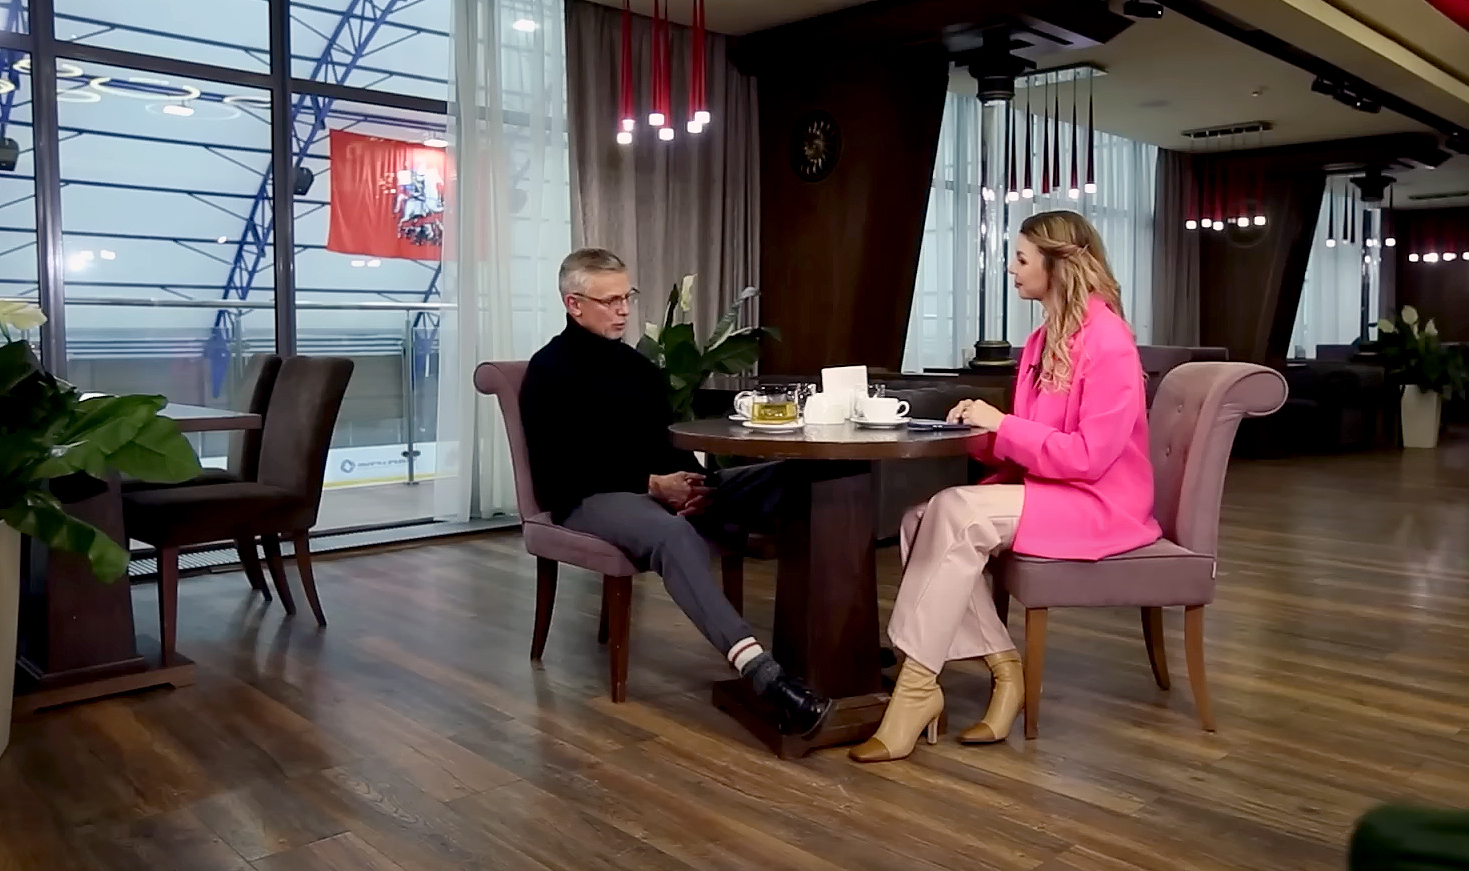 Tet-a-tet with Marusya." Interview with Igor Larionov